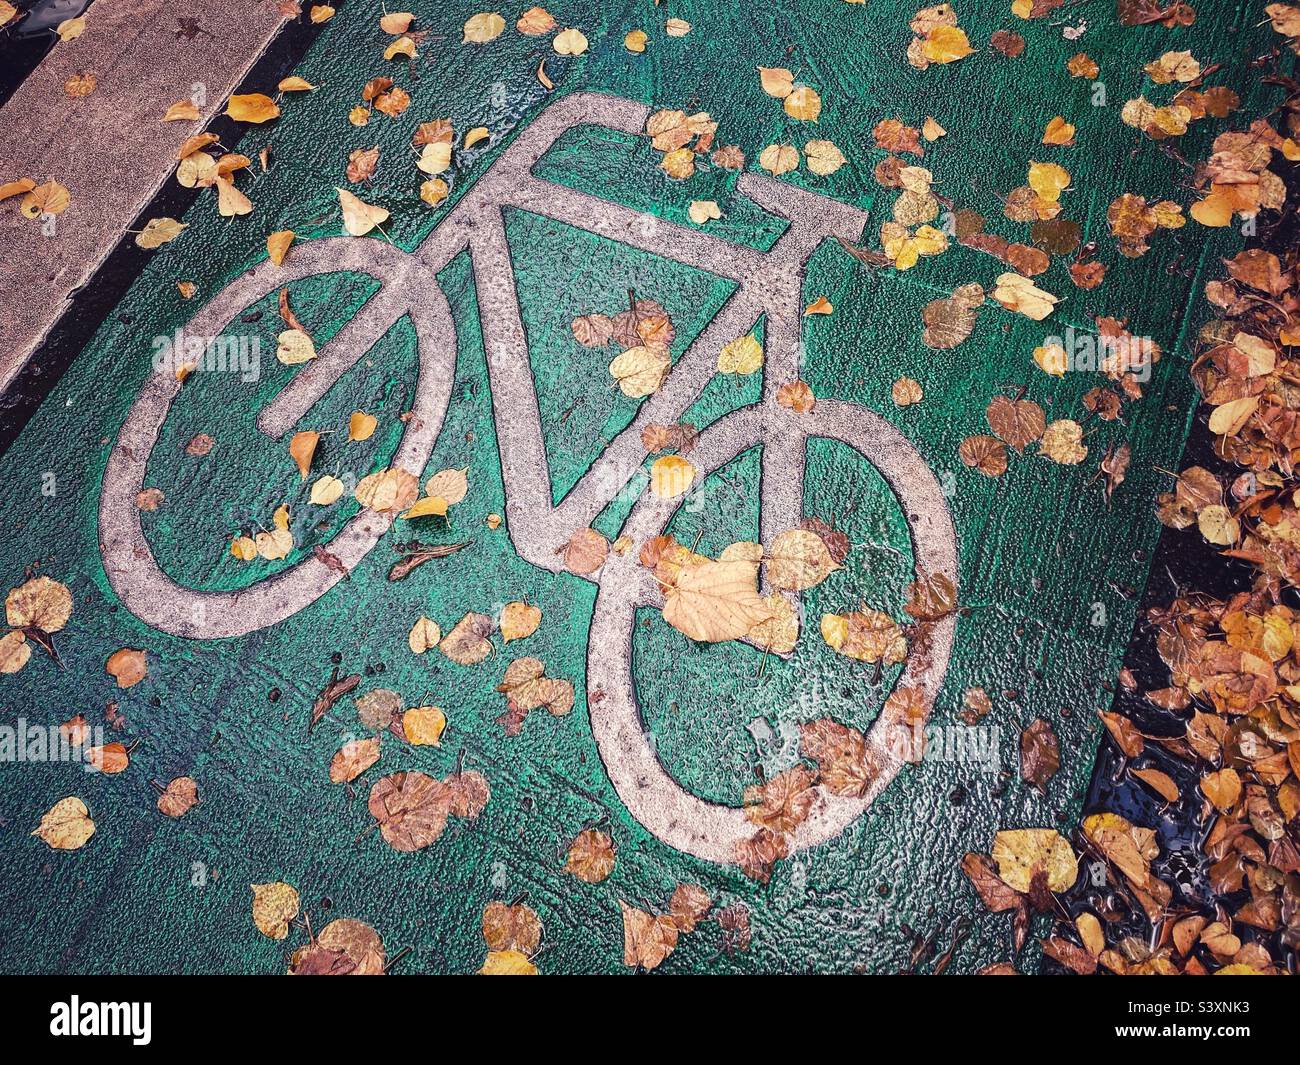 A green bicycle lane in autumn Stock Photo